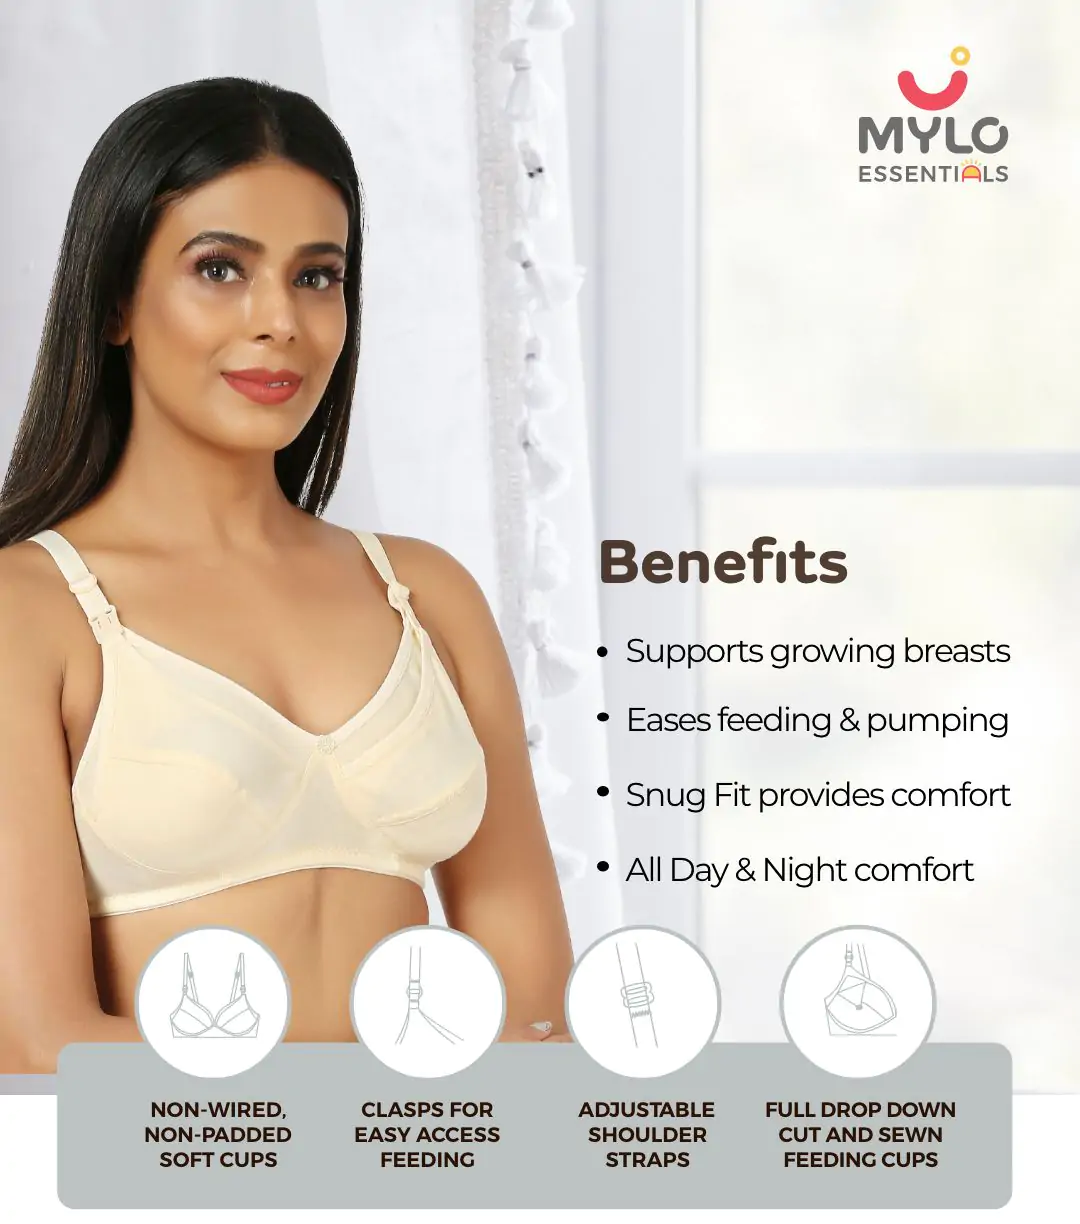 Non-Wired Non-Padded Maternity Bra/Feeding Bra with Free Bra Extender | Supports Growing Breasts | Eases Pumping & Feeding | Classic Black, Classic White, Magnolia Cream 36B about banner